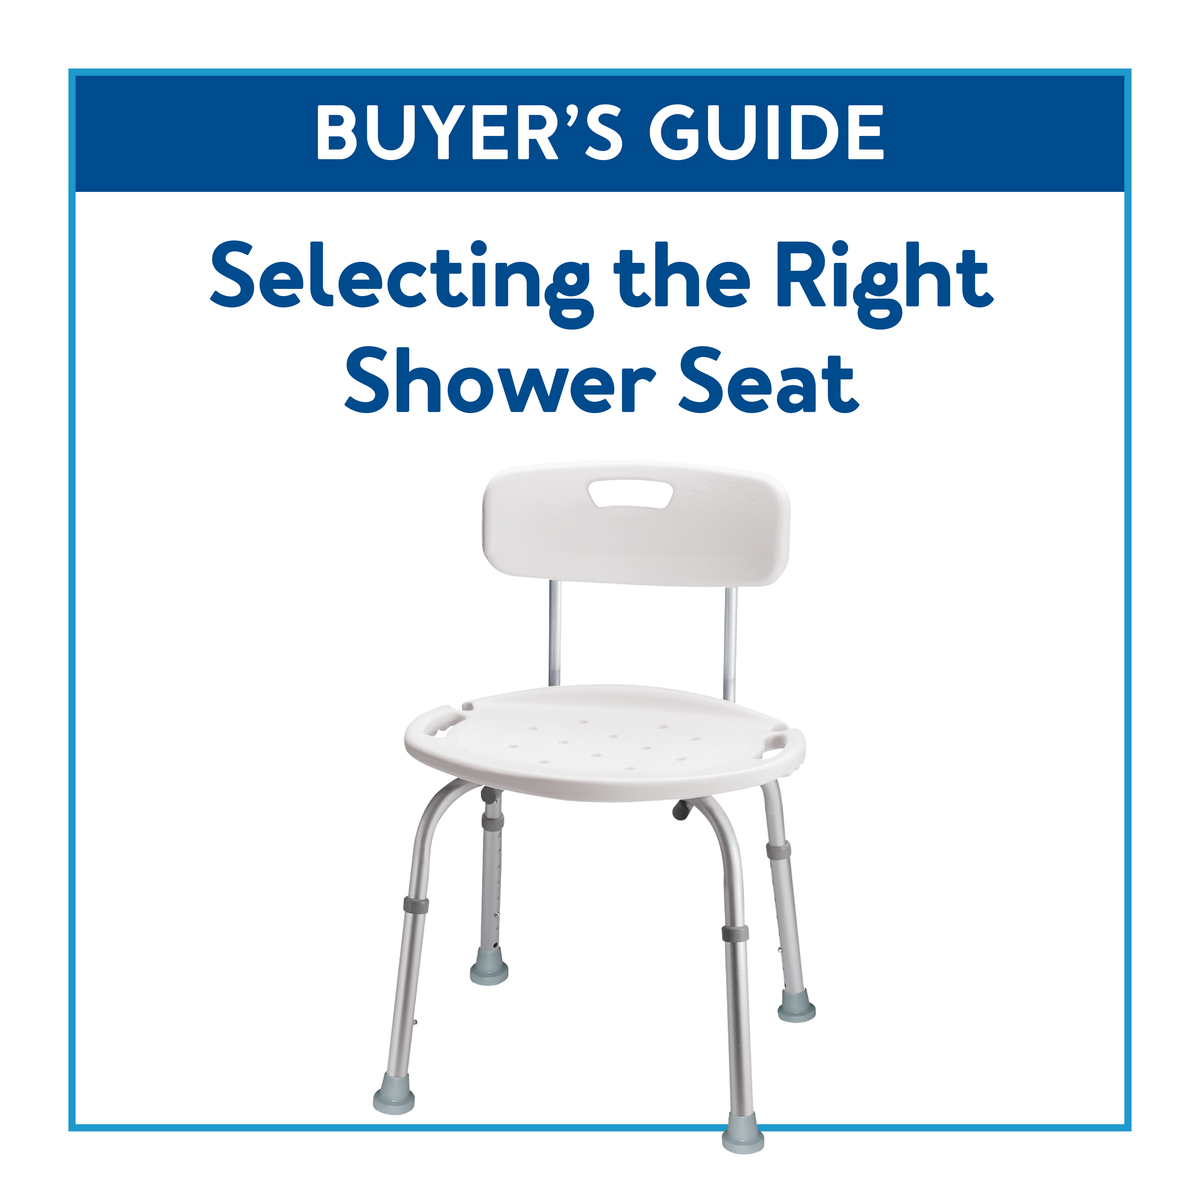 Buyer's Guide: Selecting the Right Shower Seat